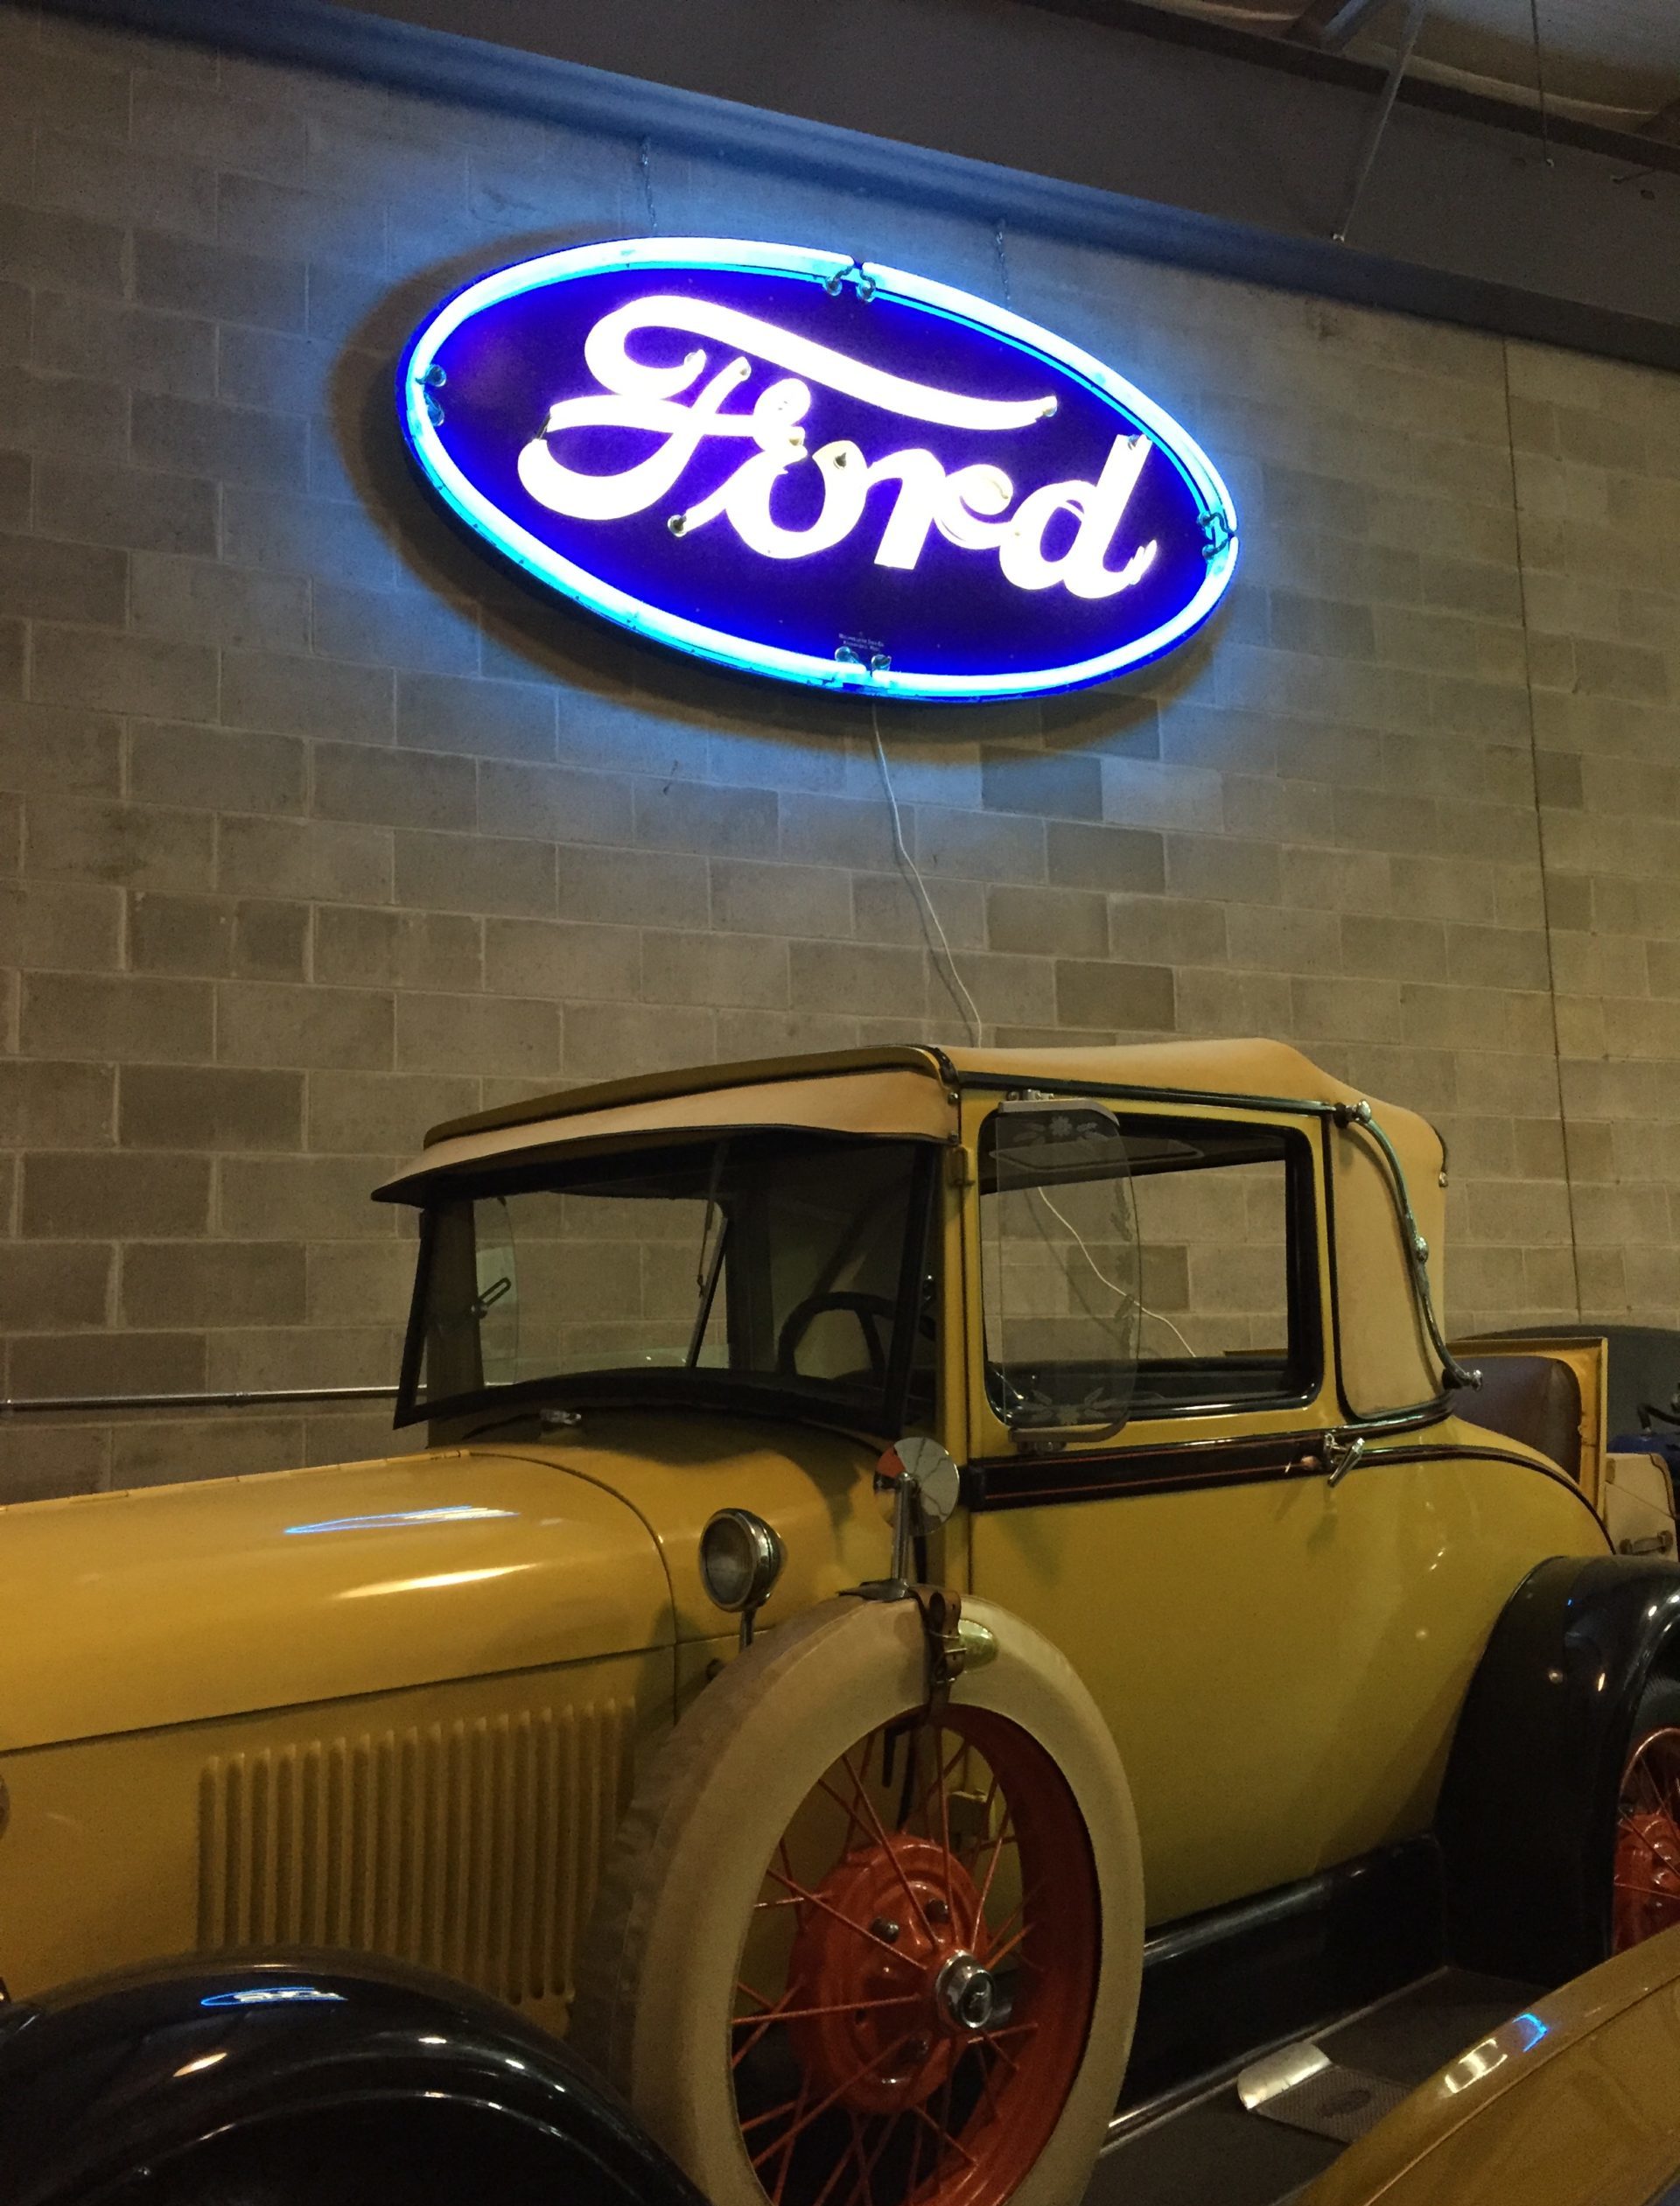 Neon blue and white ford oval logo restoration